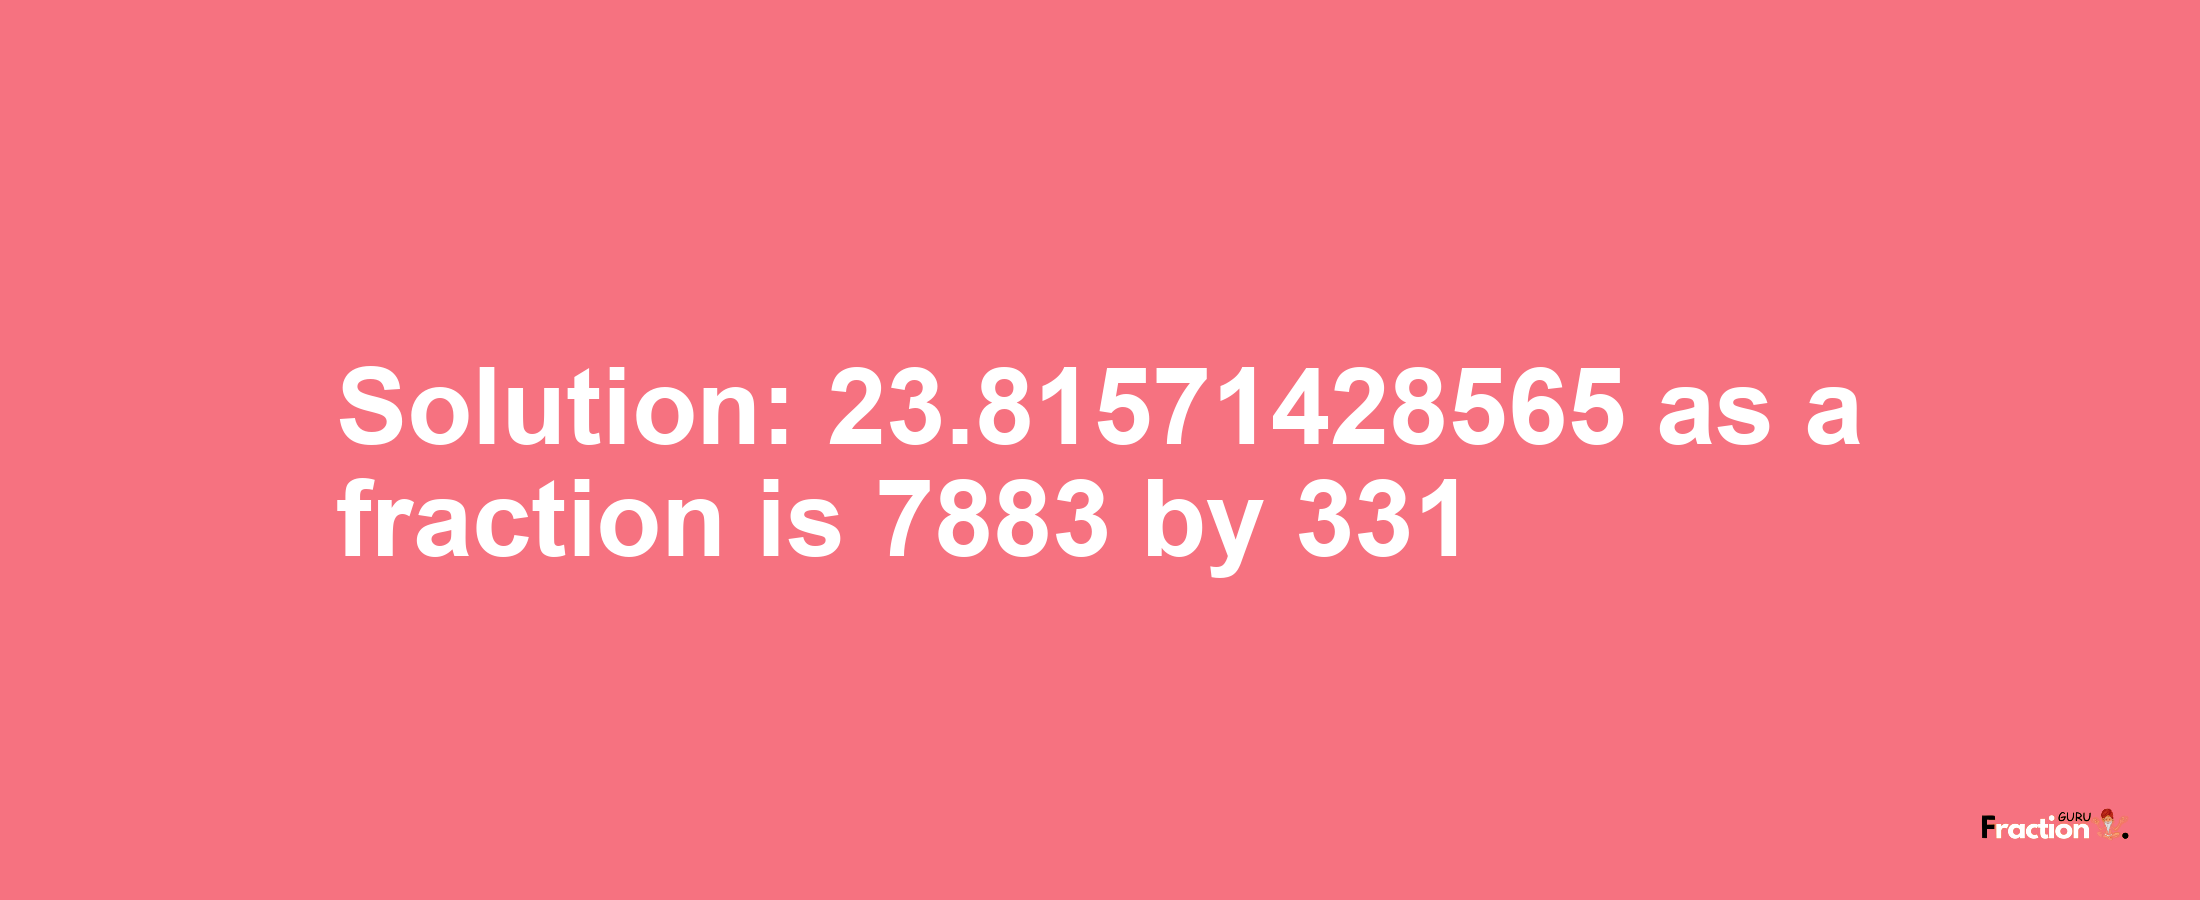 Solution:23.81571428565 as a fraction is 7883/331